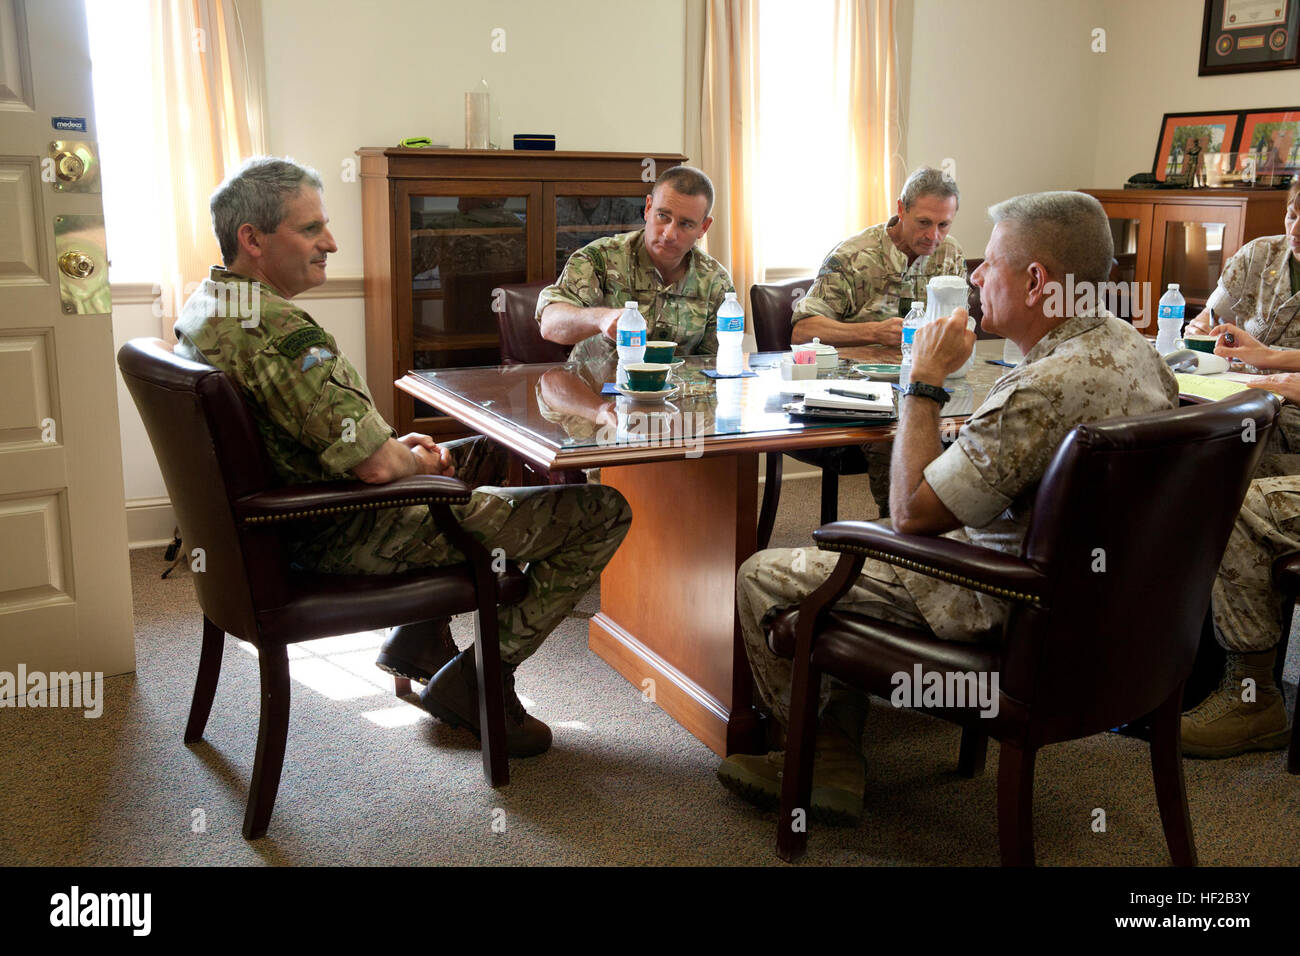 The Commandant General of the British Royal Marines, Maj. Gen. Martin Smith, left, attends a meeting with U.S. and British Marines at Marine Corps Base Quantico, Va., July 22, 2014. Smith is on his first trip to the states since assuming the role of commandant. (U.S. Marine Corps photo by Staff Sgt. Brian Lautenslager, HQMC Combat Camera/Released) British Royal Marines Visit MCB Quantico, Va 140722-M-OH106-199 Stock Photo